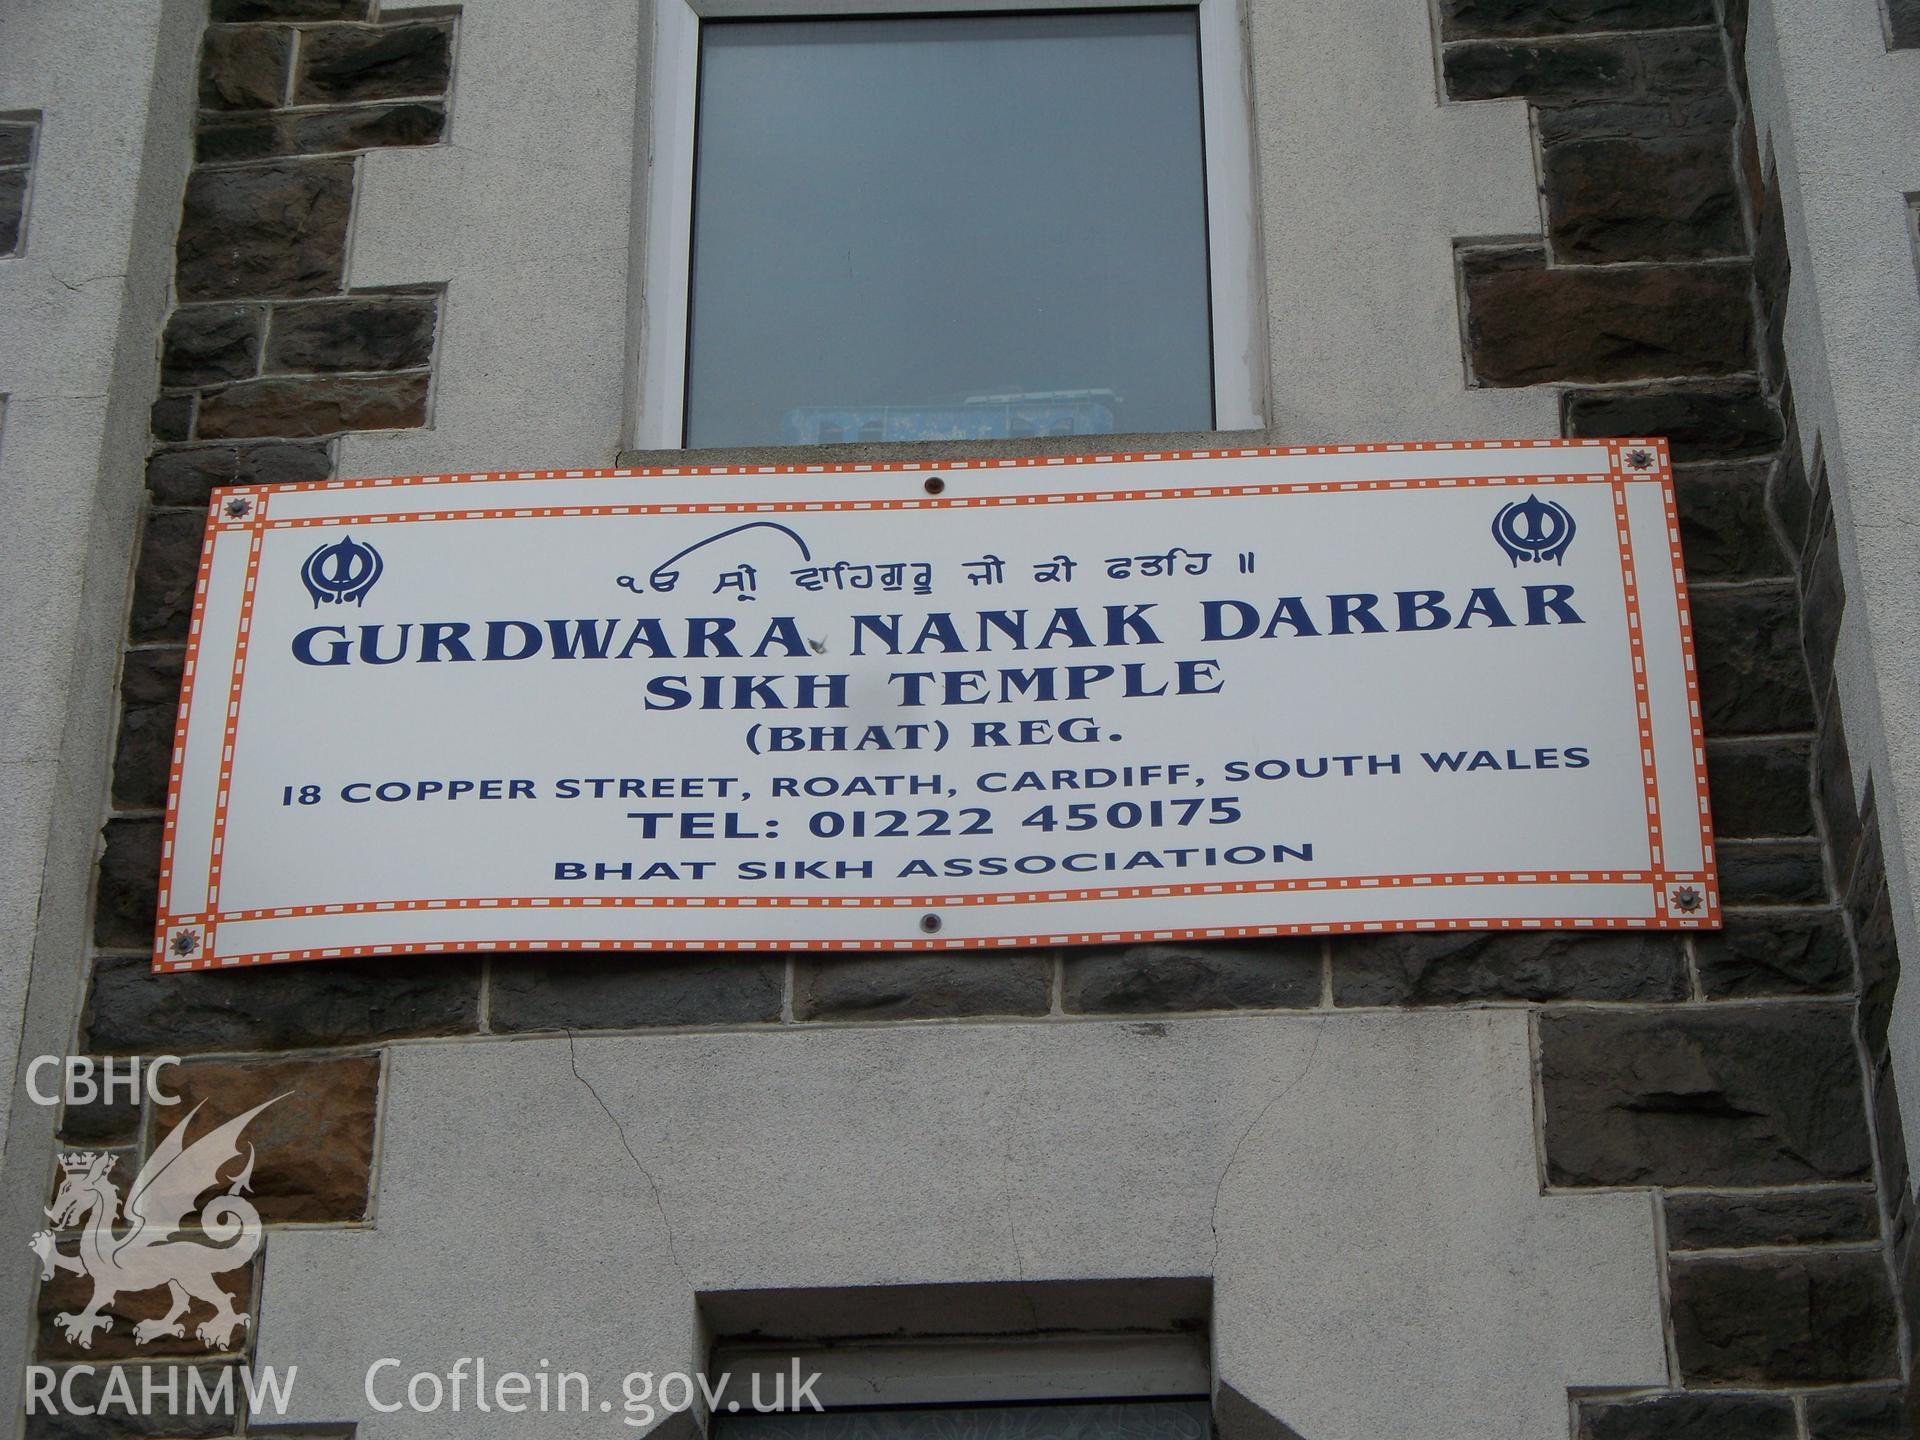 Gurdwara Nanak Darbar Sikh Temple. Originally an Independent Chapel built in 1871, the building was converted for use as a Sikh temple in the 1980s.